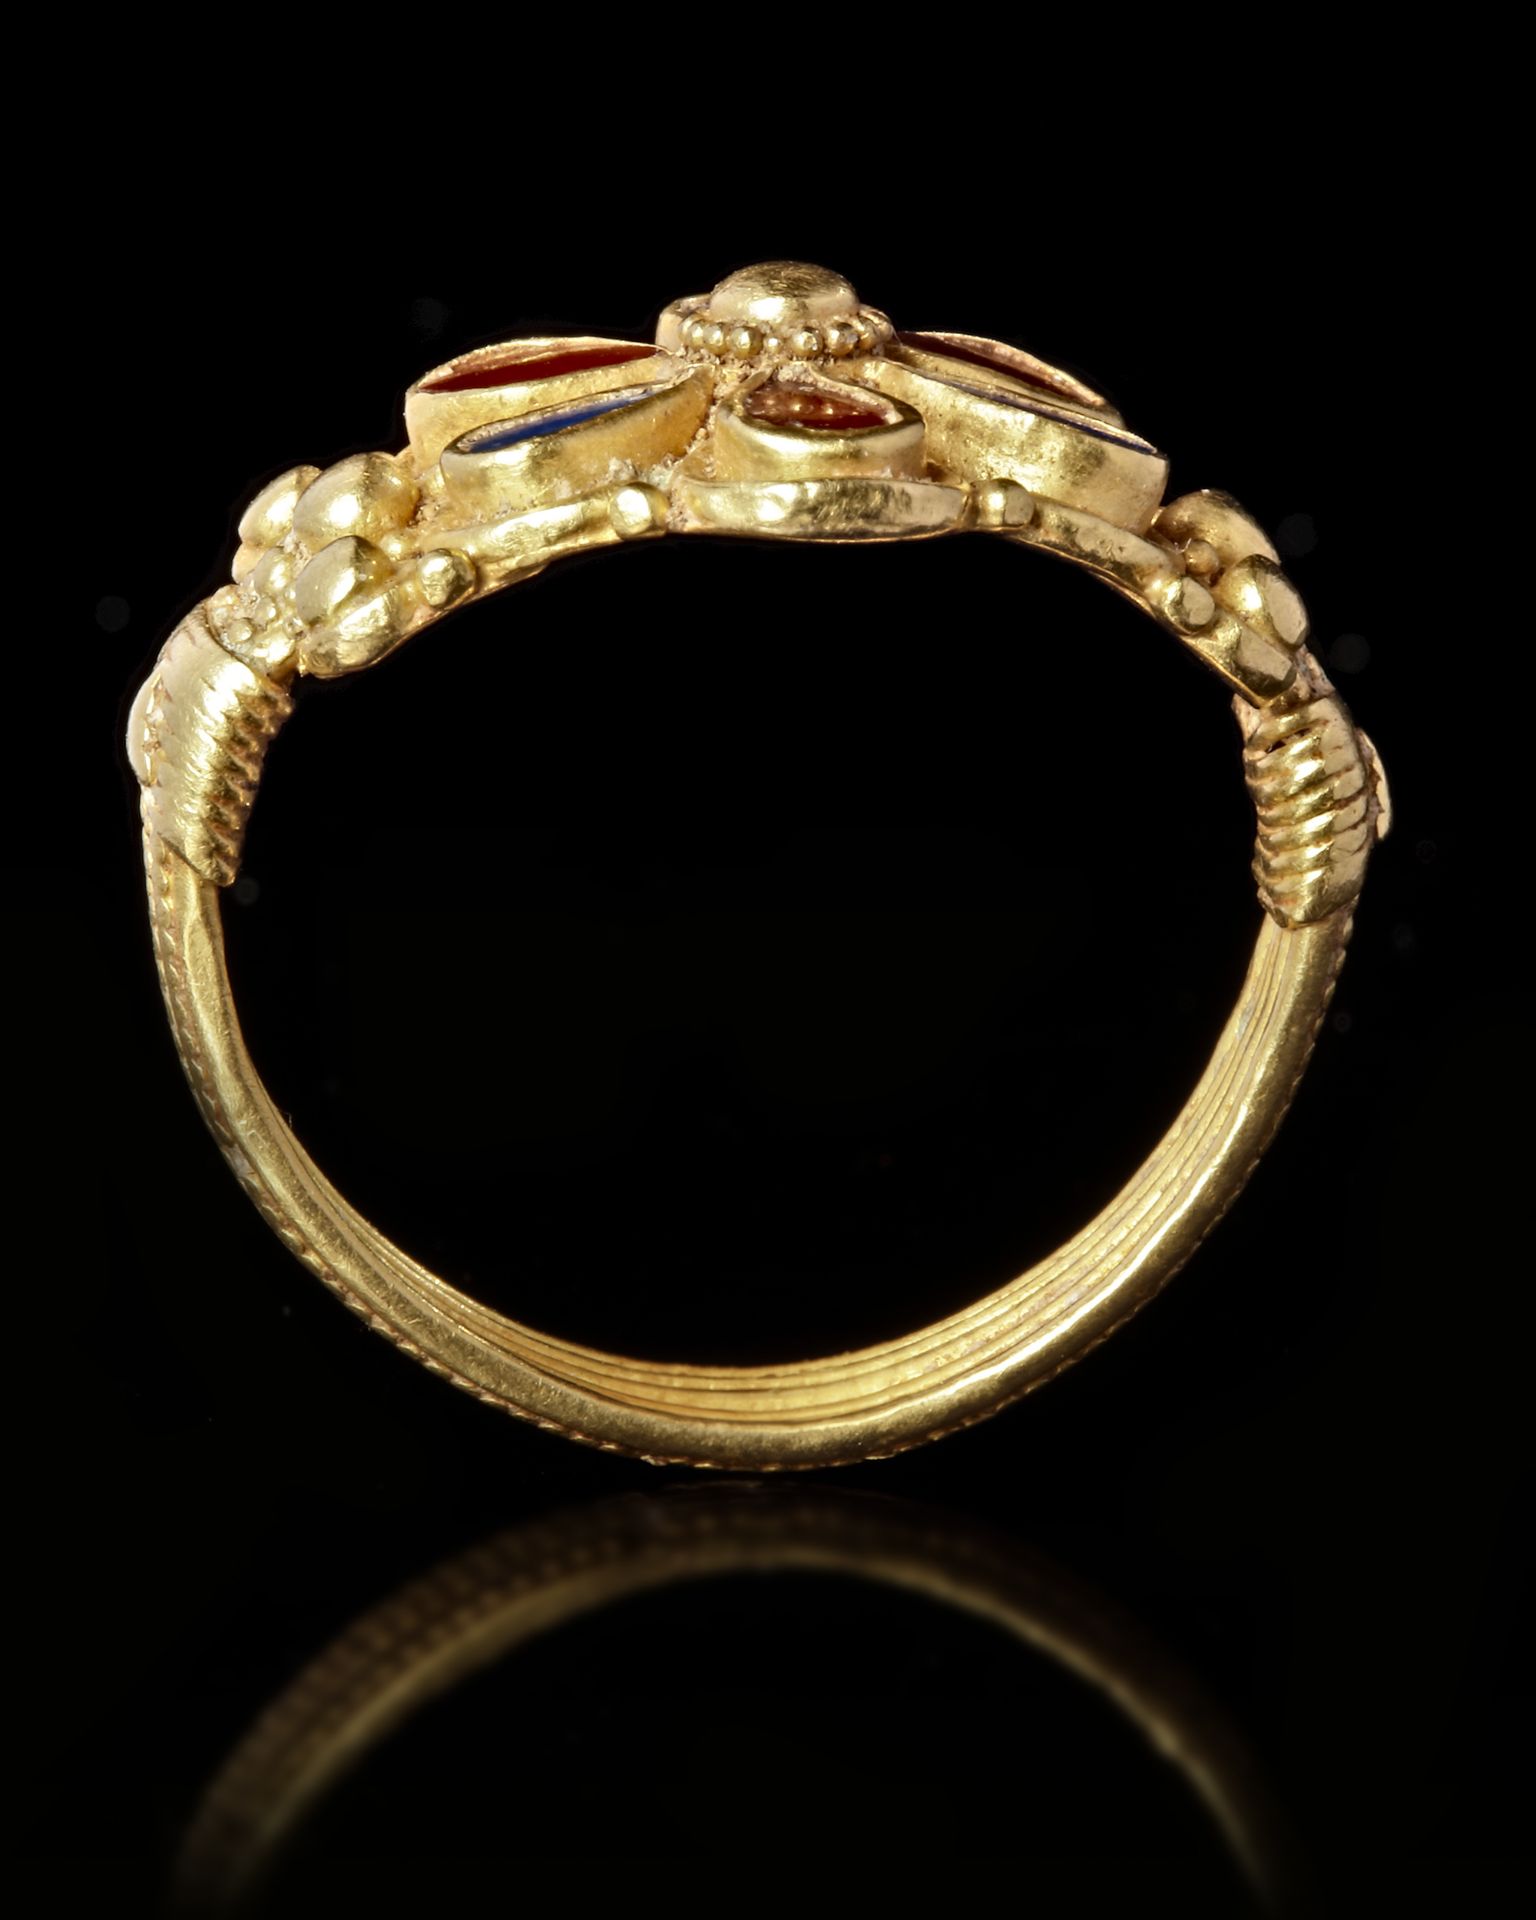 A PHOENICIAN GOLD RING, 5TH TO 4TH CENTURY BC - Image 3 of 3